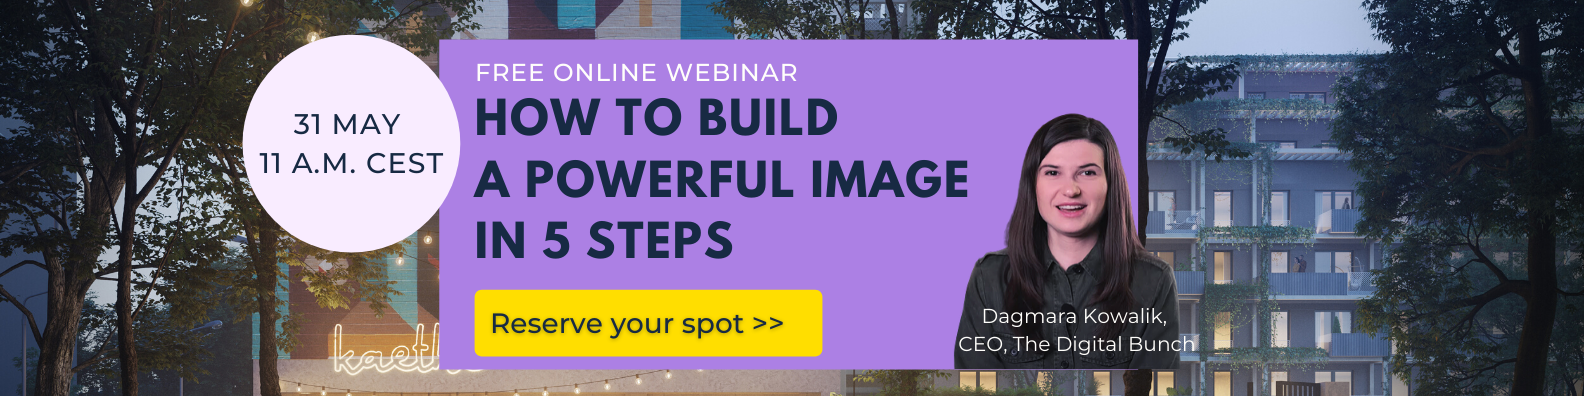 How To Build A Powerful Image In 5 Steps, Amsterdam, Limburg, Netherlands